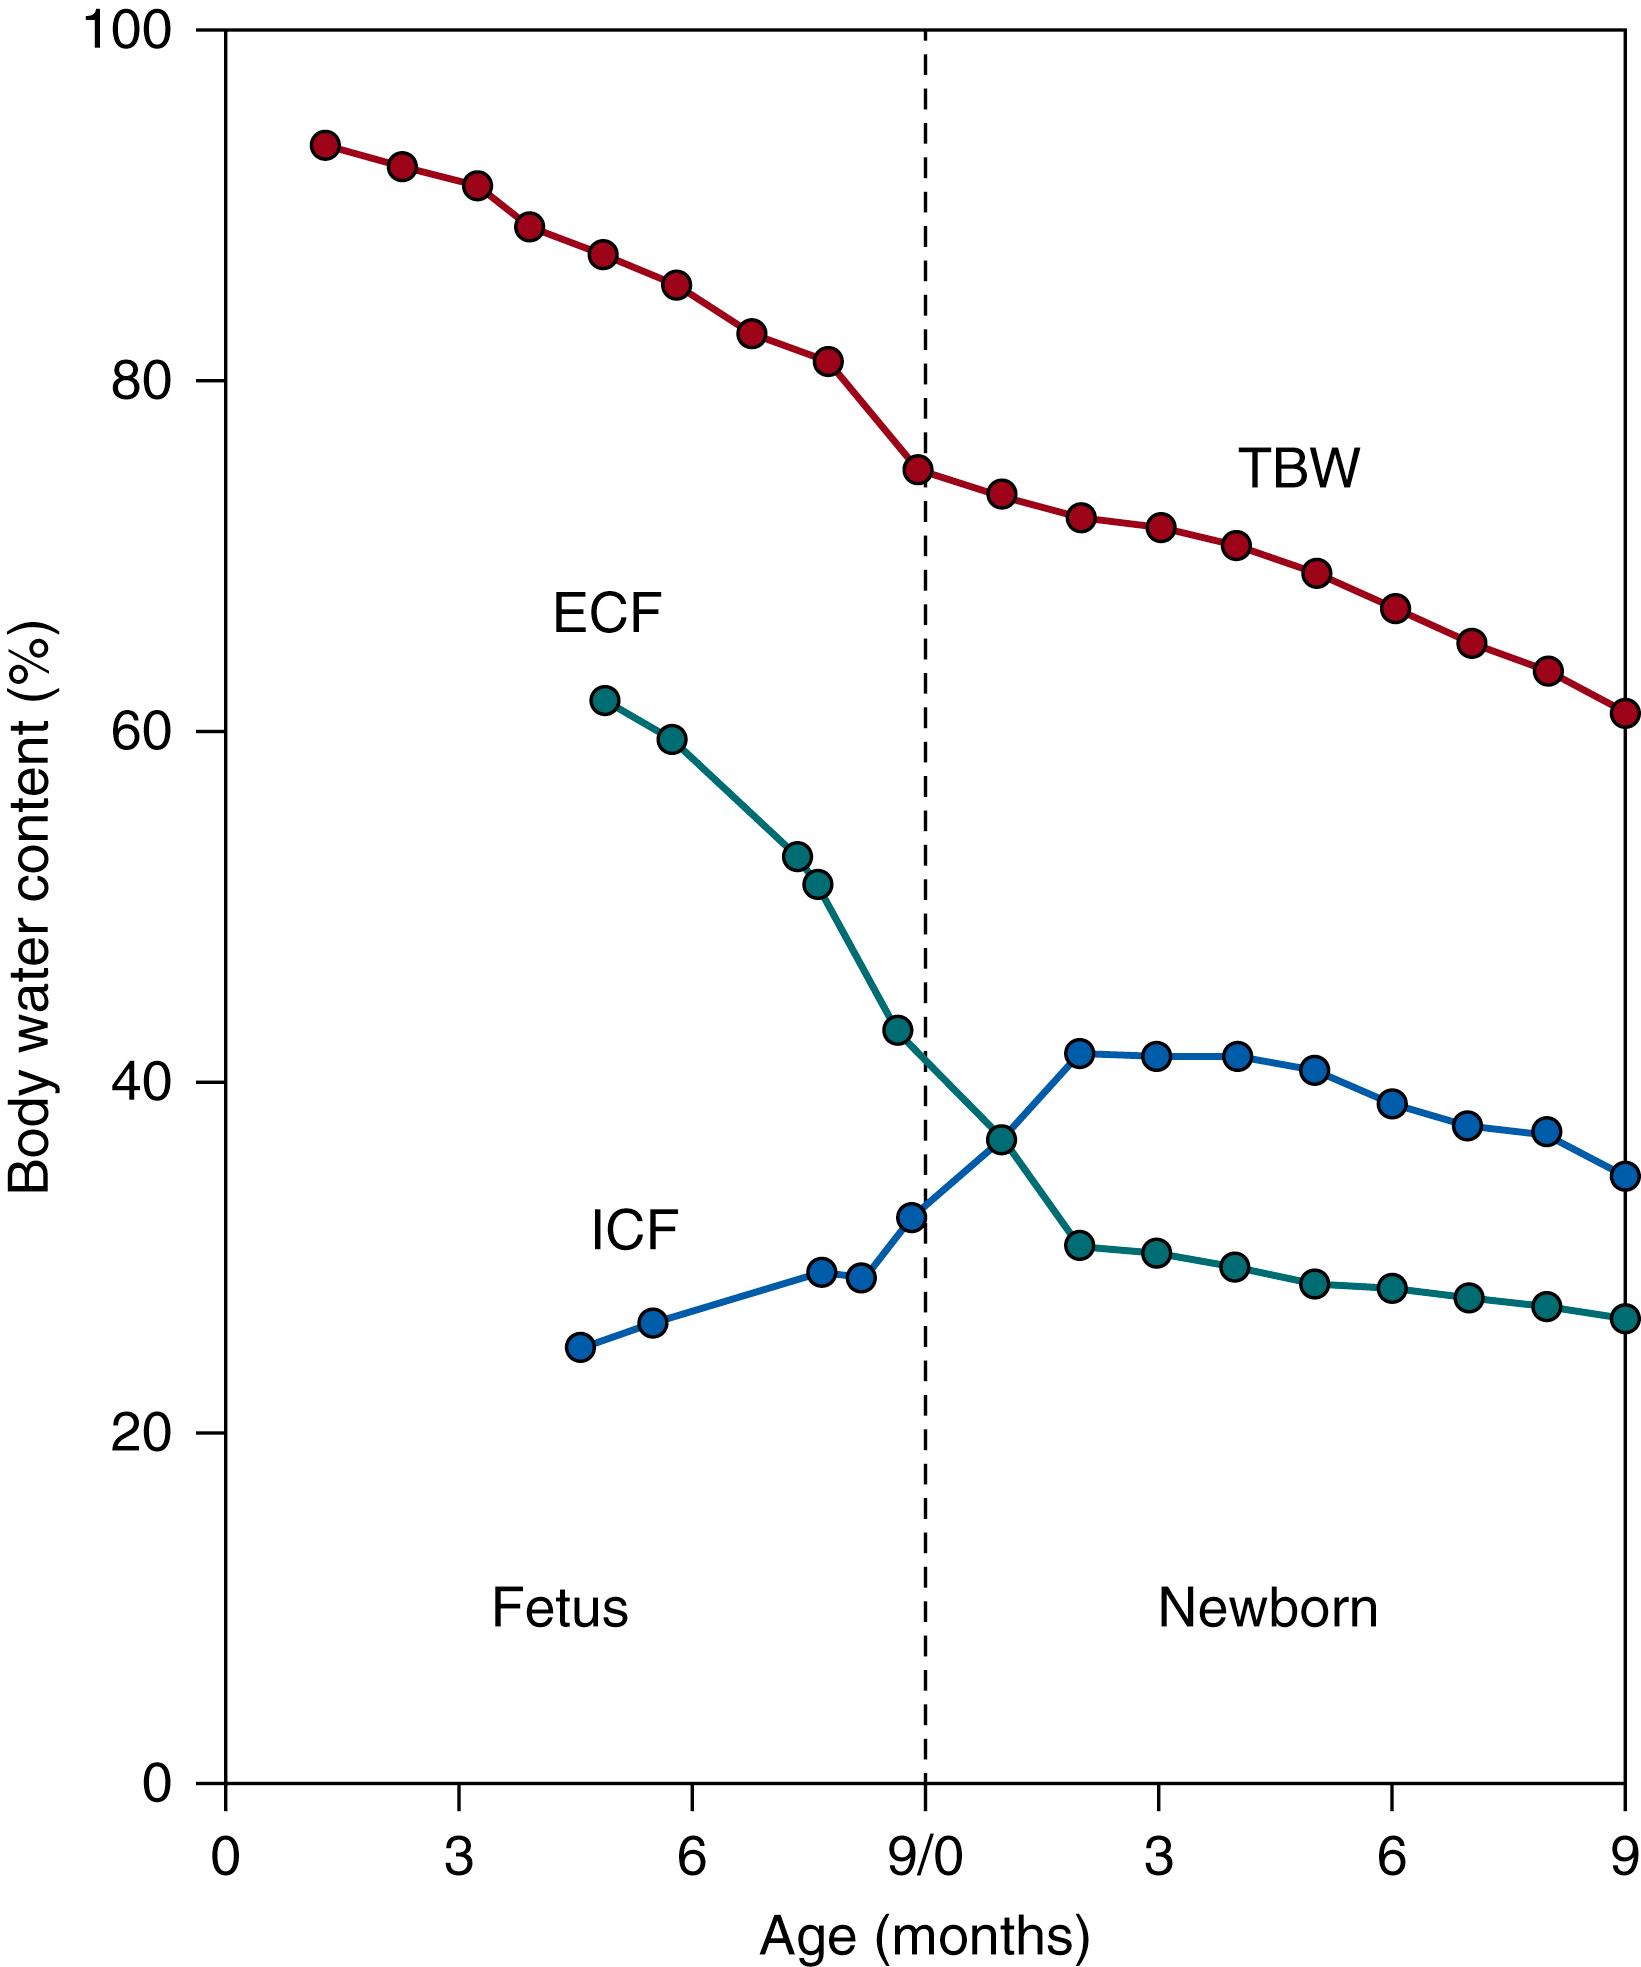 Fig. 105.5, Total body water (TBW) content and fluid distribution between intracellular fluid (ICF) and extracellular fluid (ECF) compartments in humans during fetal and neonatal development and during the first 9 months after birth.